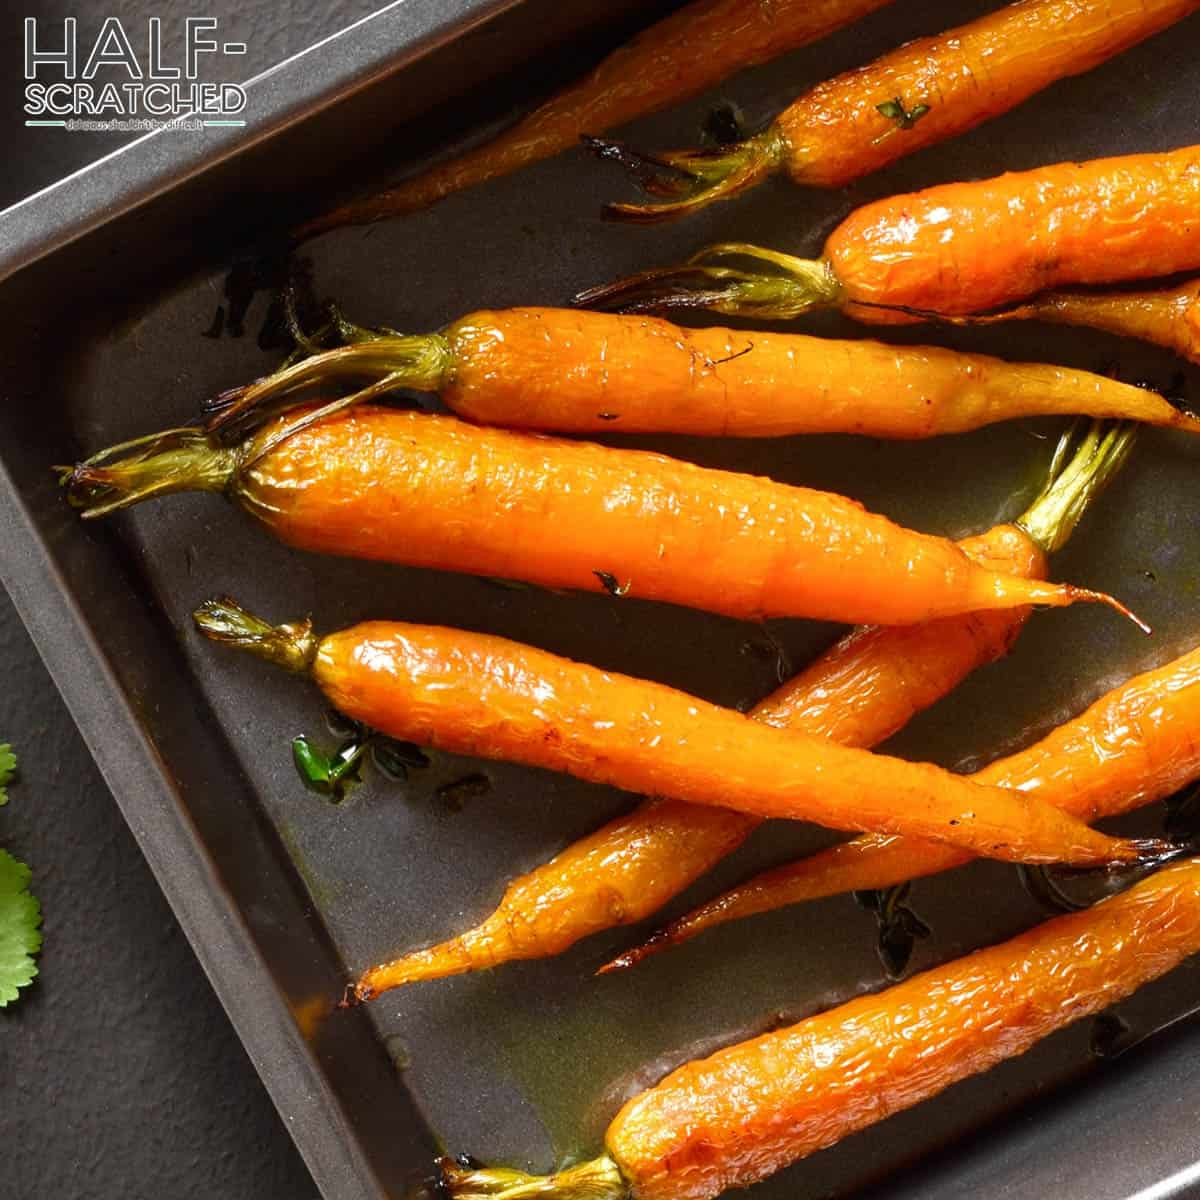 Carrots in oven at 350 F